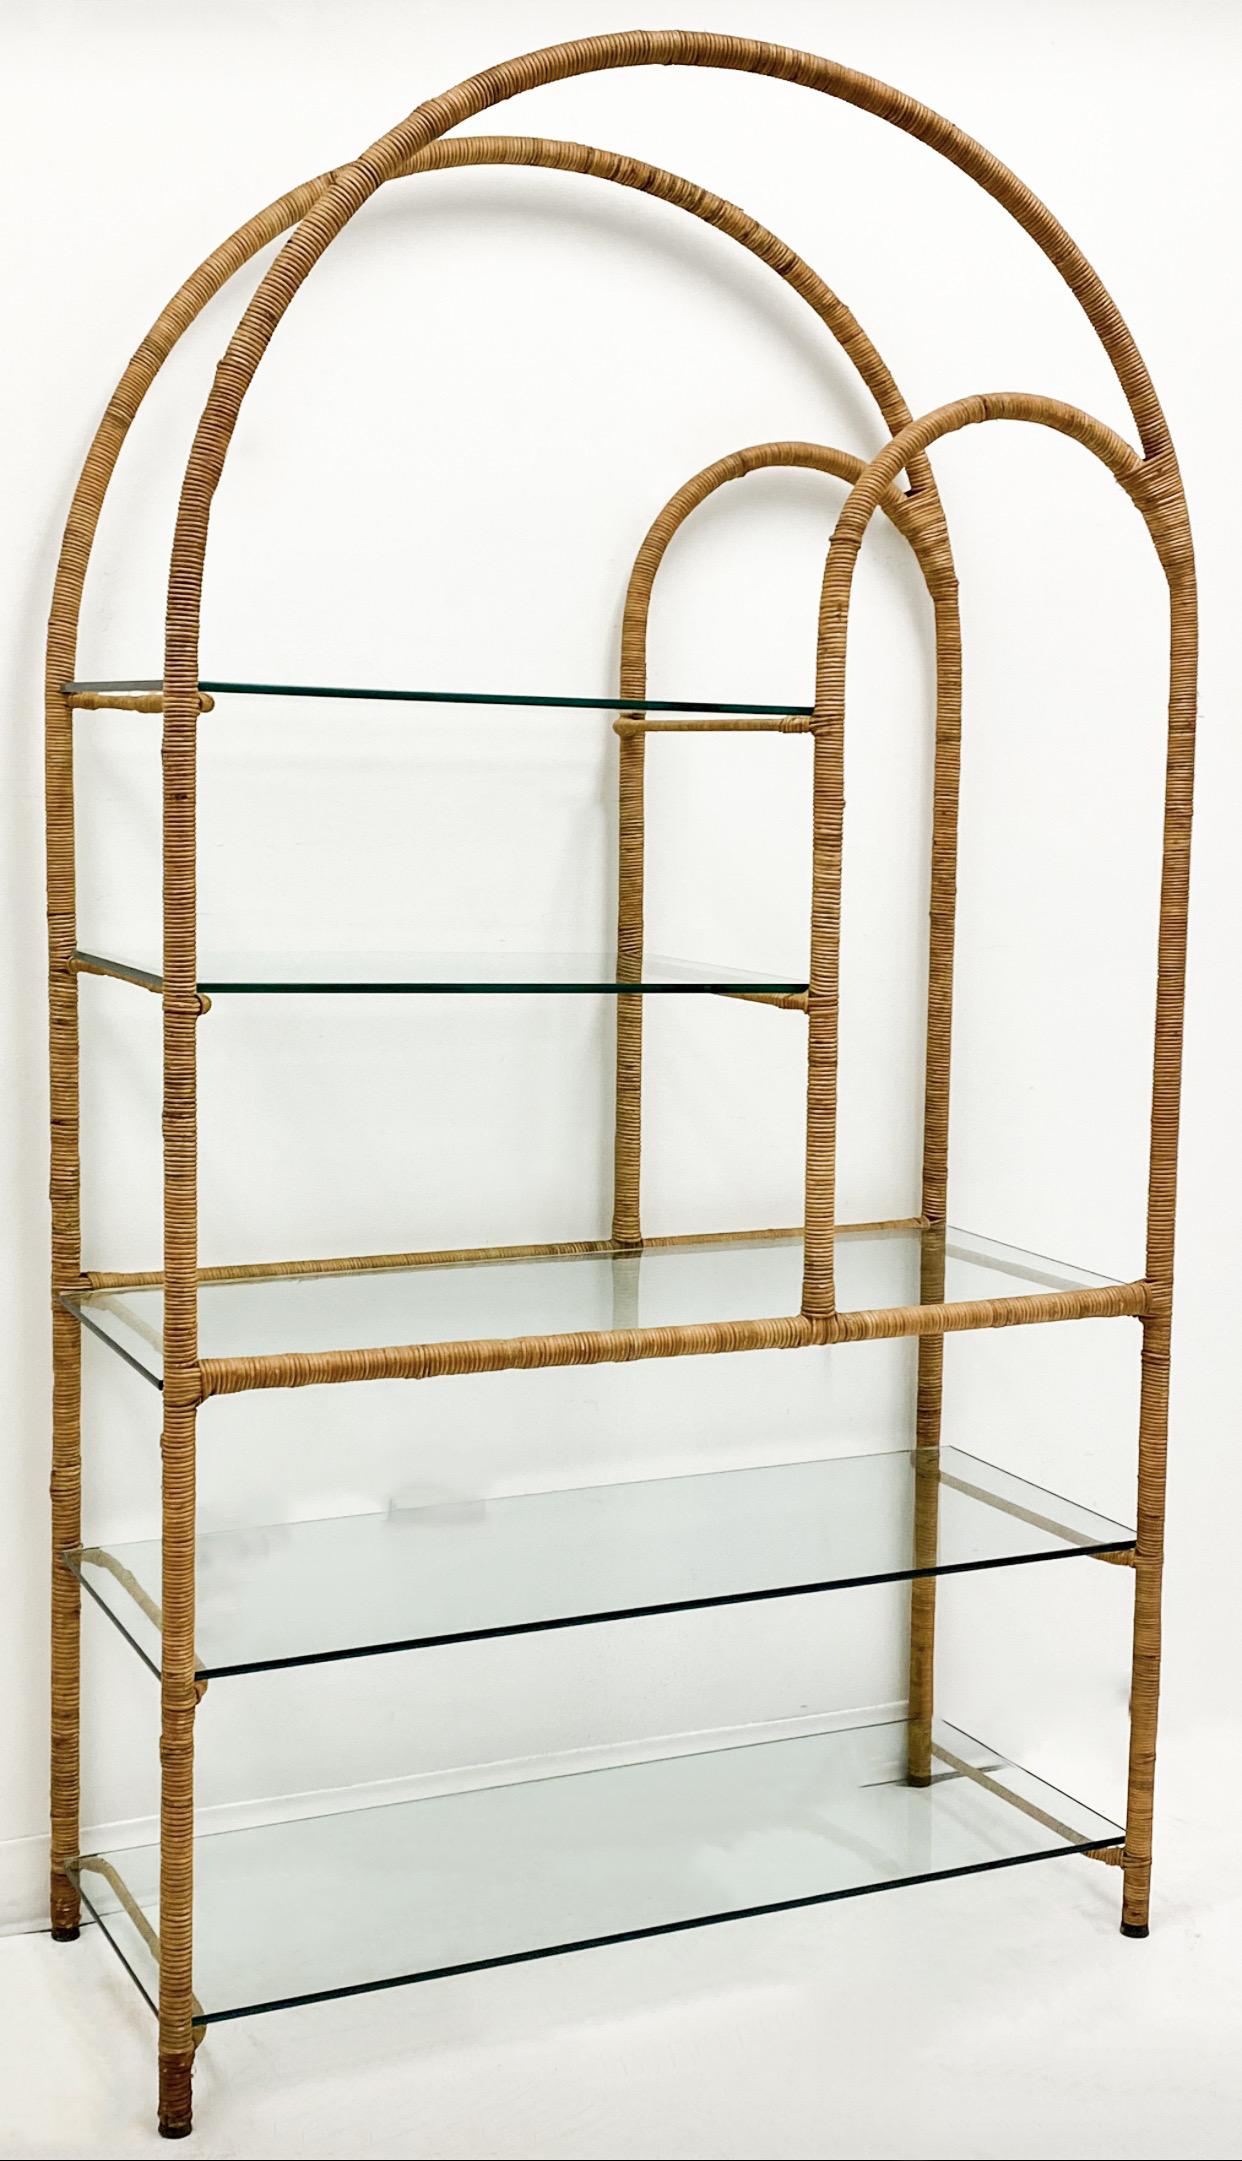 These are 1970s rattan wrapped étagères with glass shelving in very good condition. The metal frames are sturdy and have been meticulously wrapped in bamboo/rattan/wicker. The overall effect is a clean, modern look. They are of unknown manufacture.